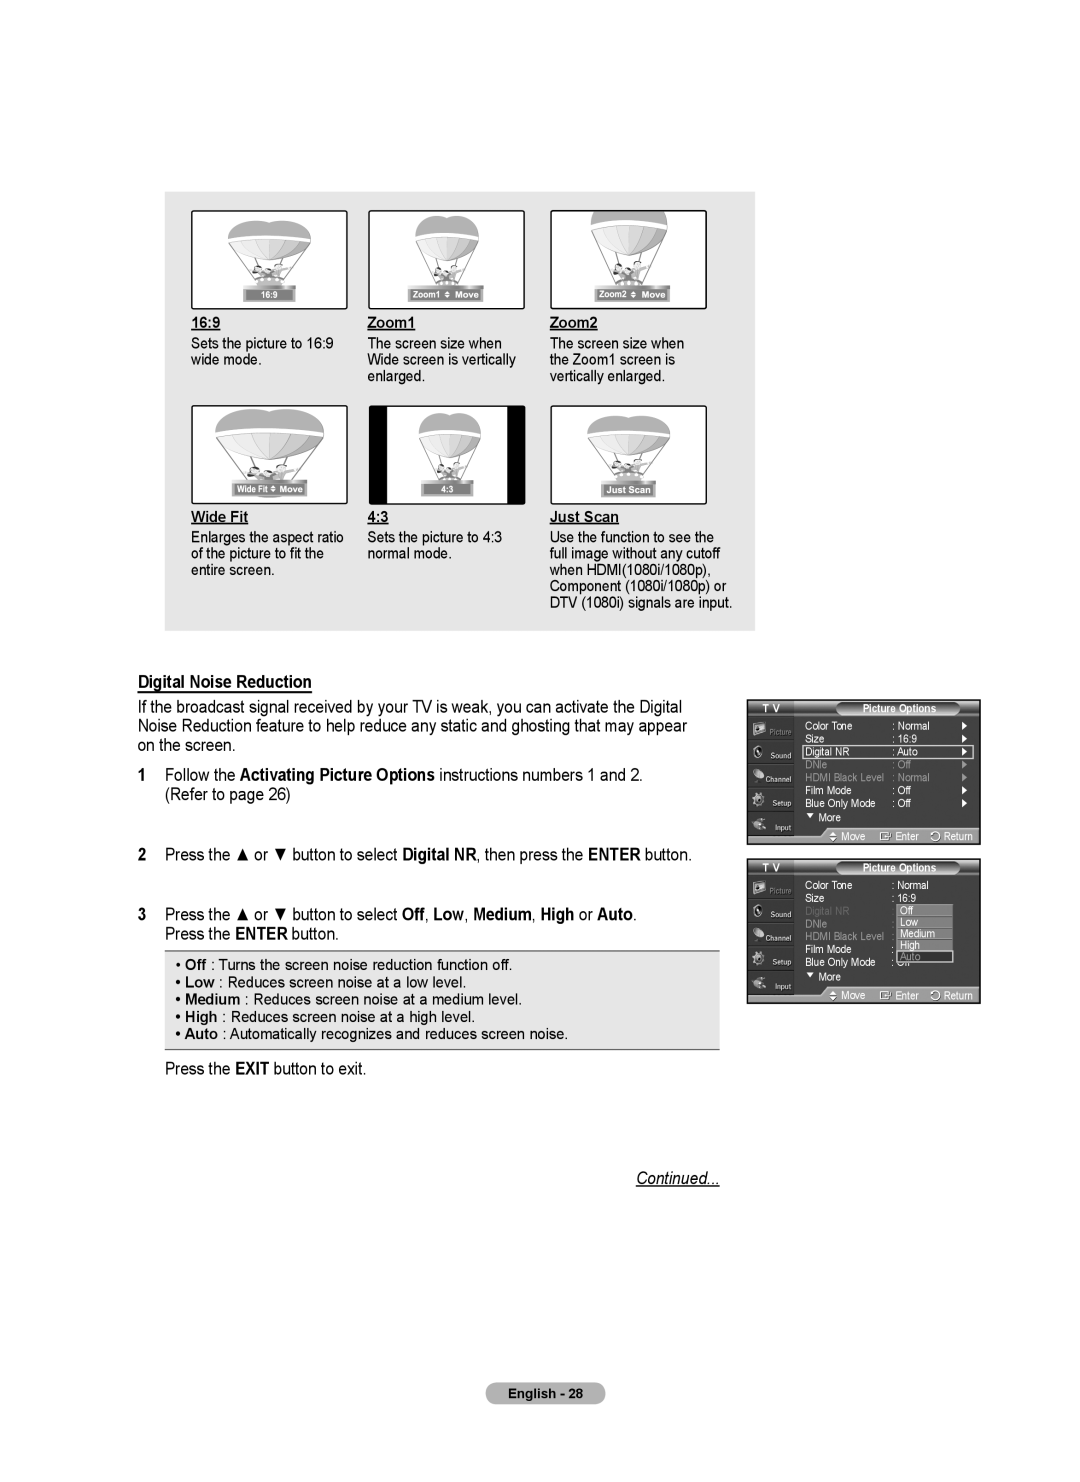 Samsung 460 user manual Digital Noise Reduction, Continued, Wide Fit, Zoom1, Zoom2, Just Scan 